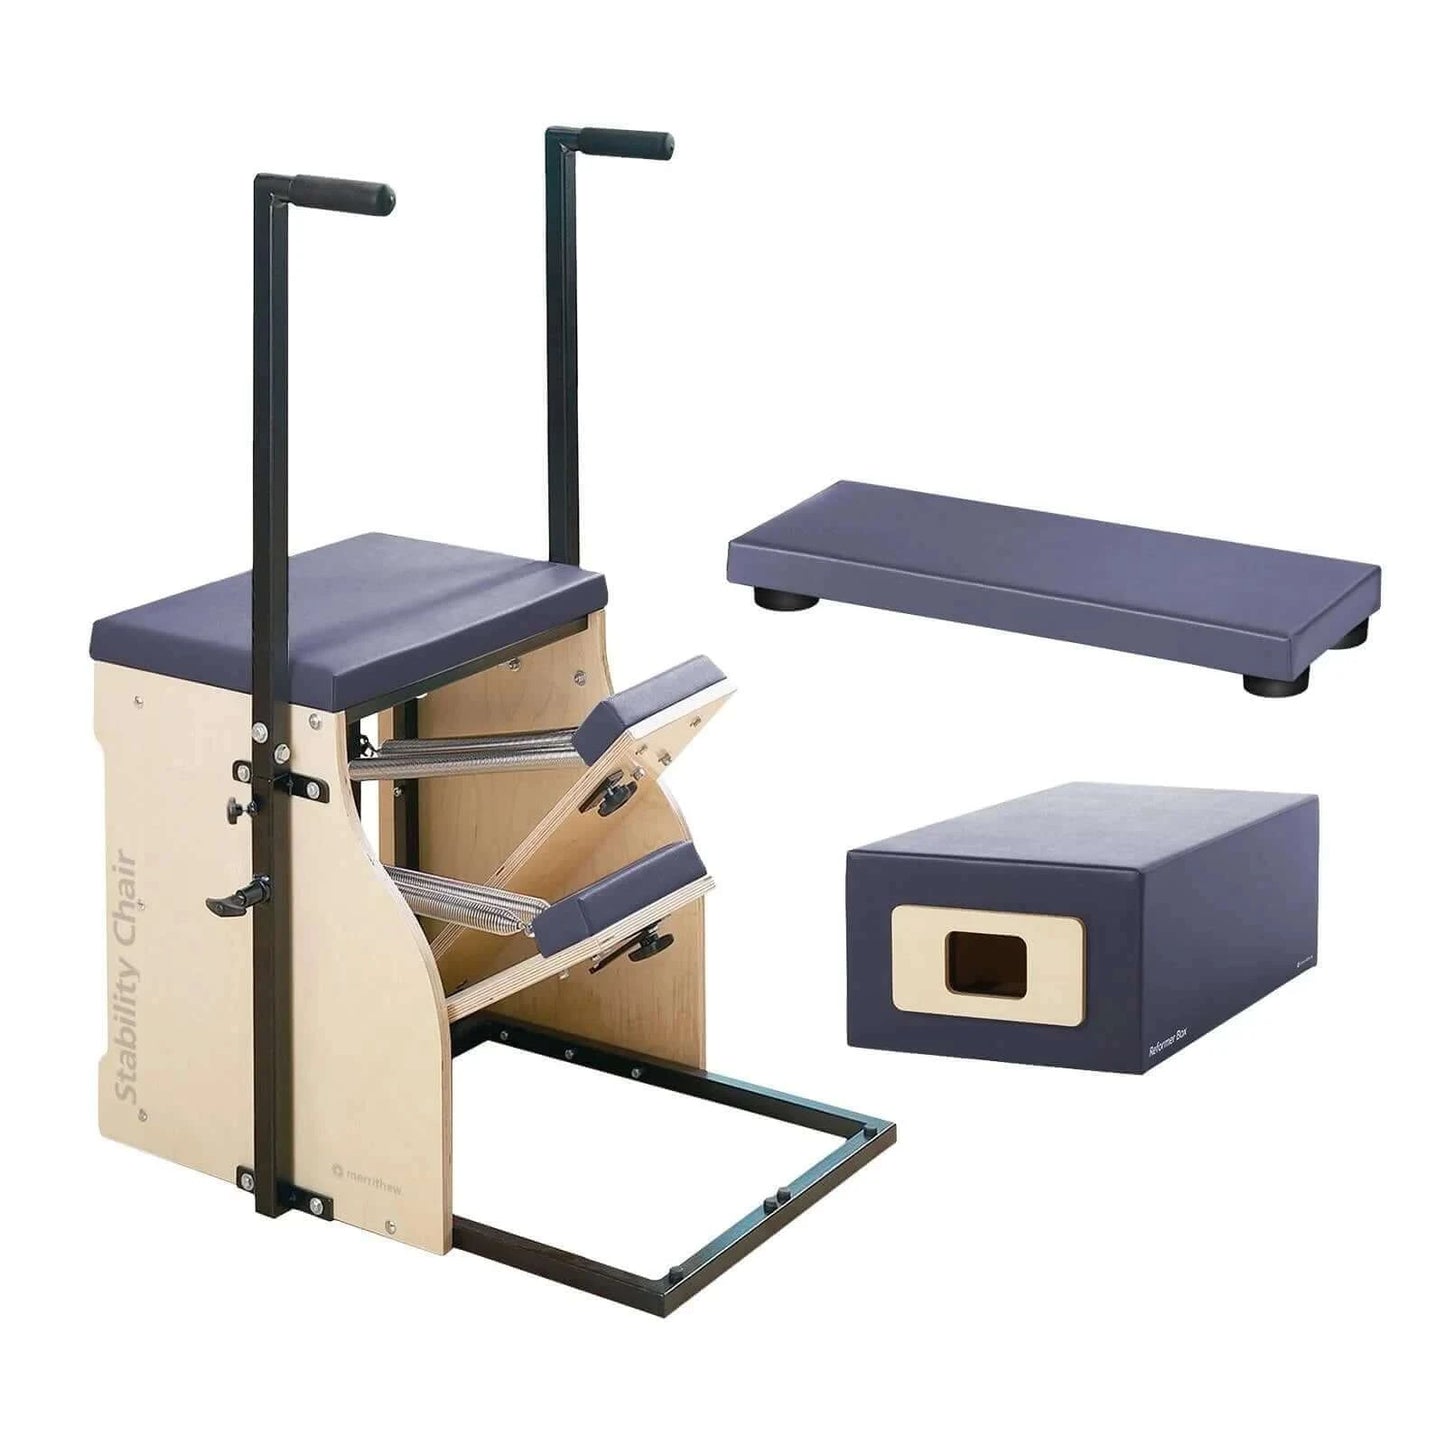 Eclipse Merrithew™ Pilates Split-Pedal Stability Chair™ Bundle by Merrithew™ sold by Pilates Matters® by BSP LLC